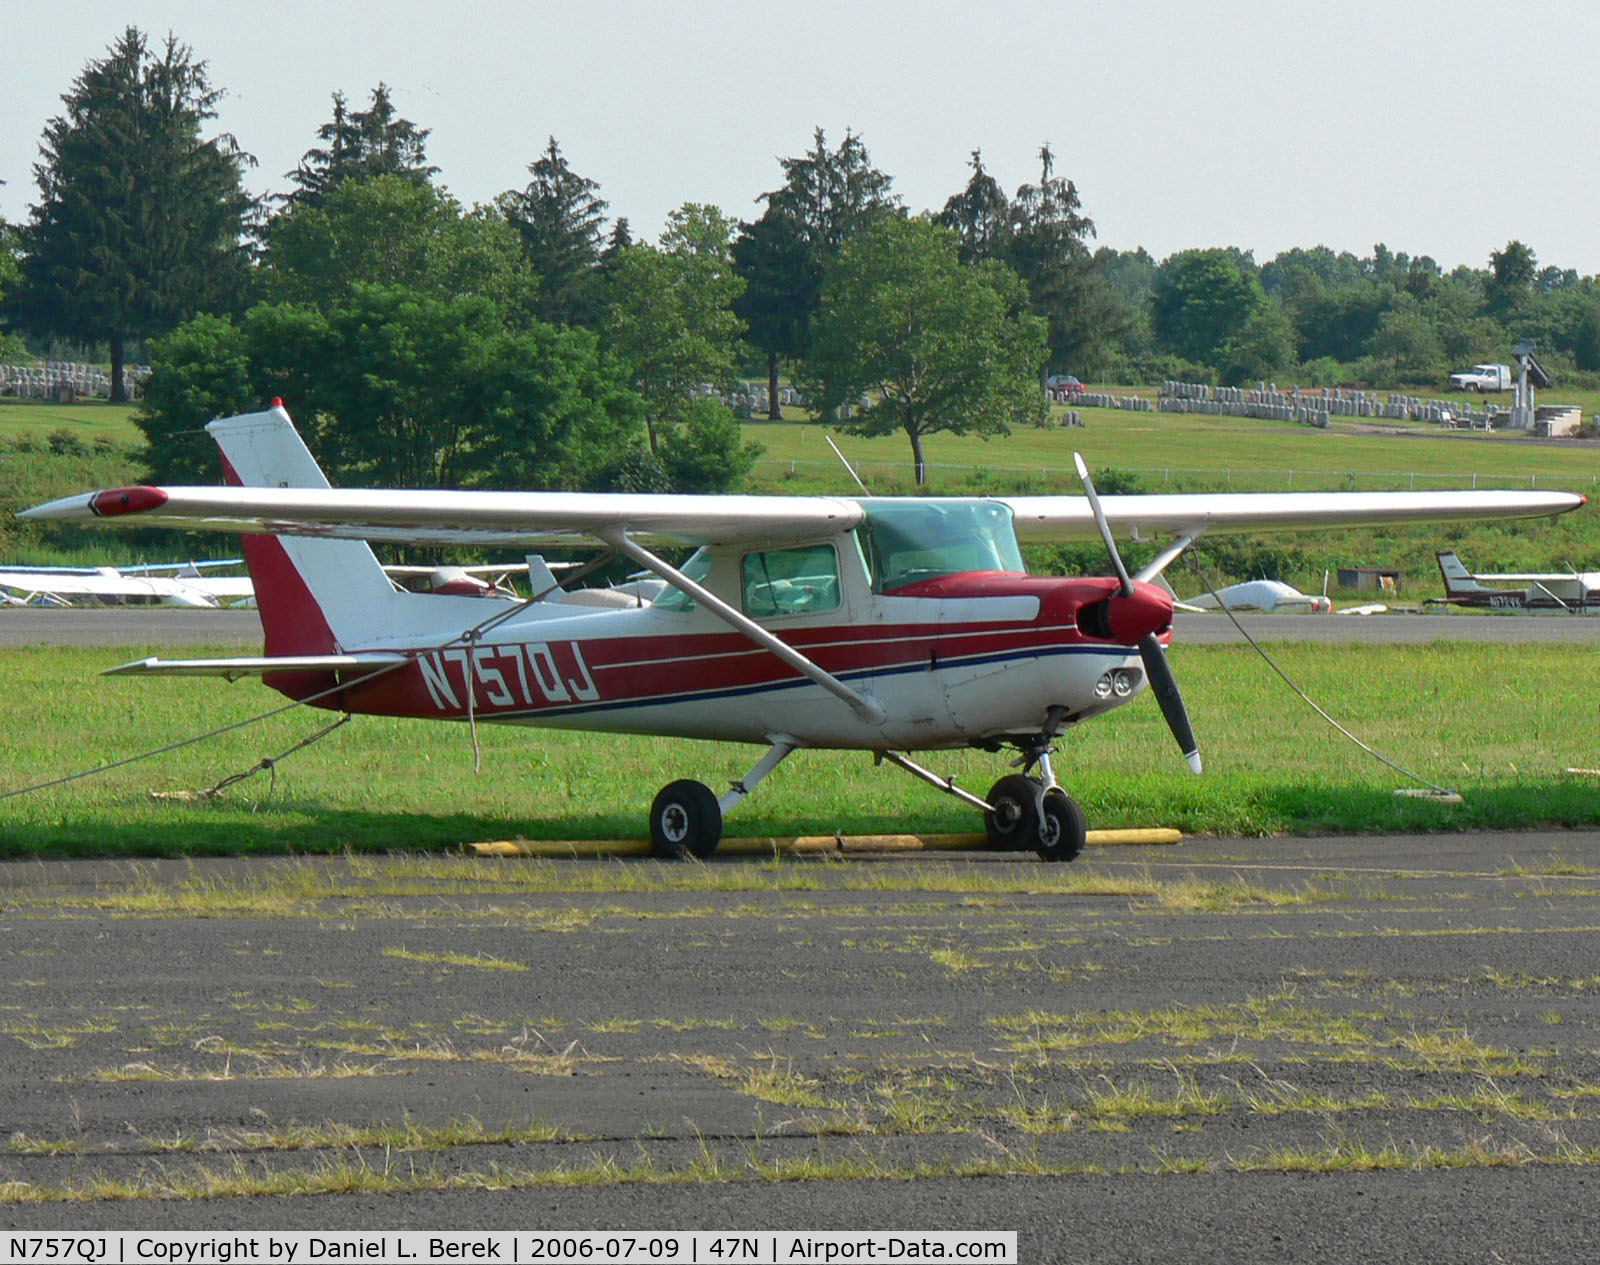 N757QJ, 1977 Cessna 152 C/N 15279917, Cute little trainer dating from 1977 is still on the job, going strong.